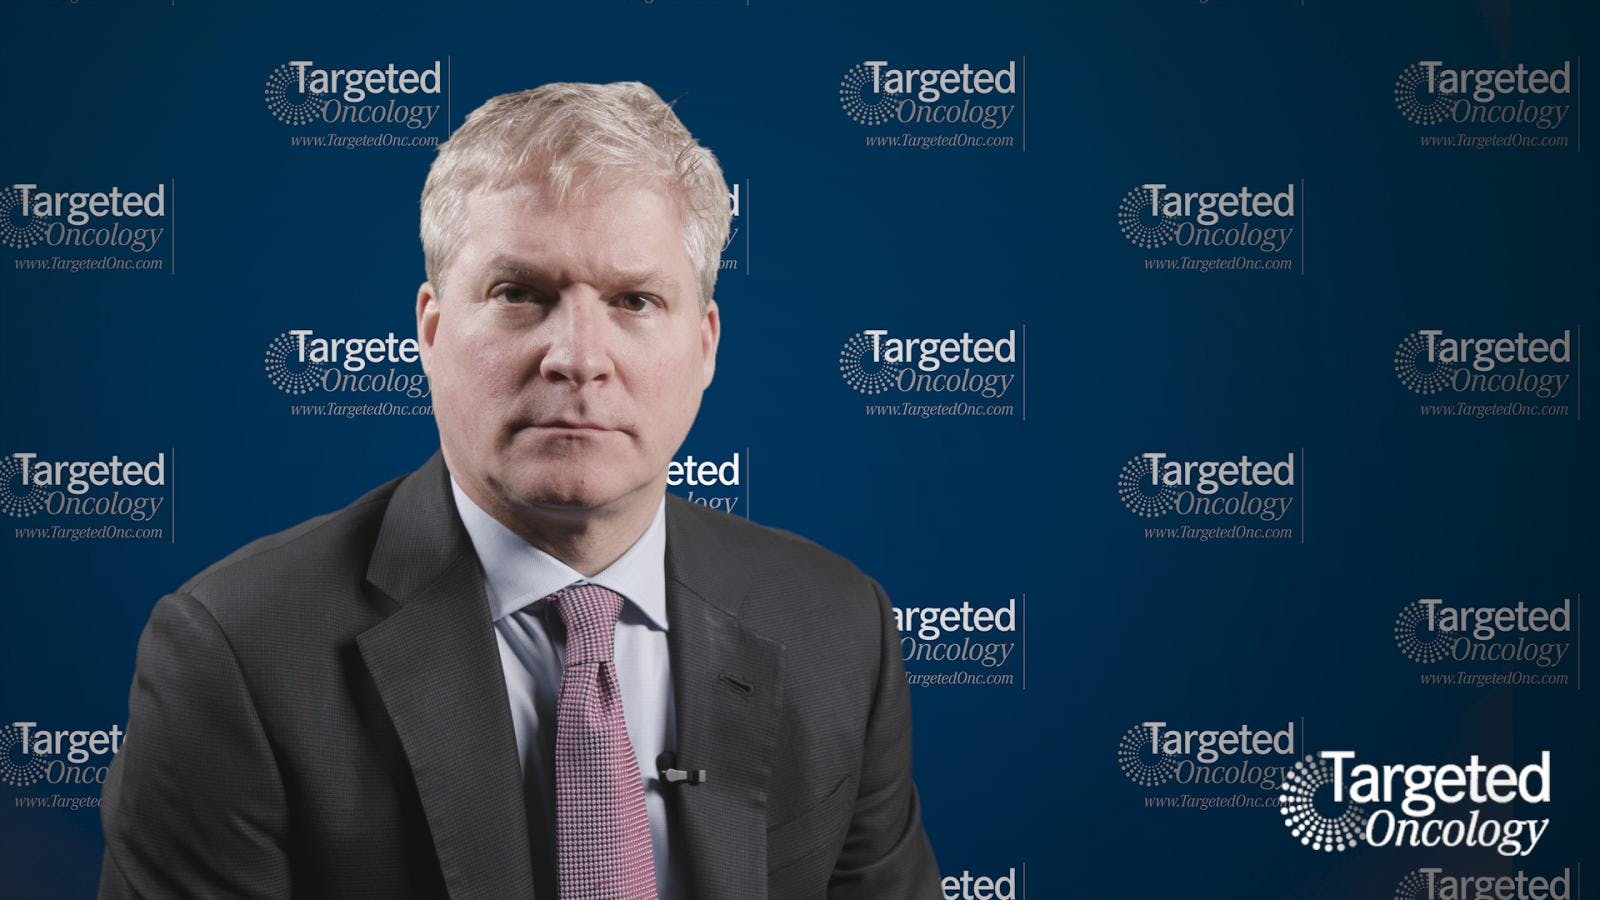 Managing A Case of Heavily Pretreated Recurrent Ovarian Cancer